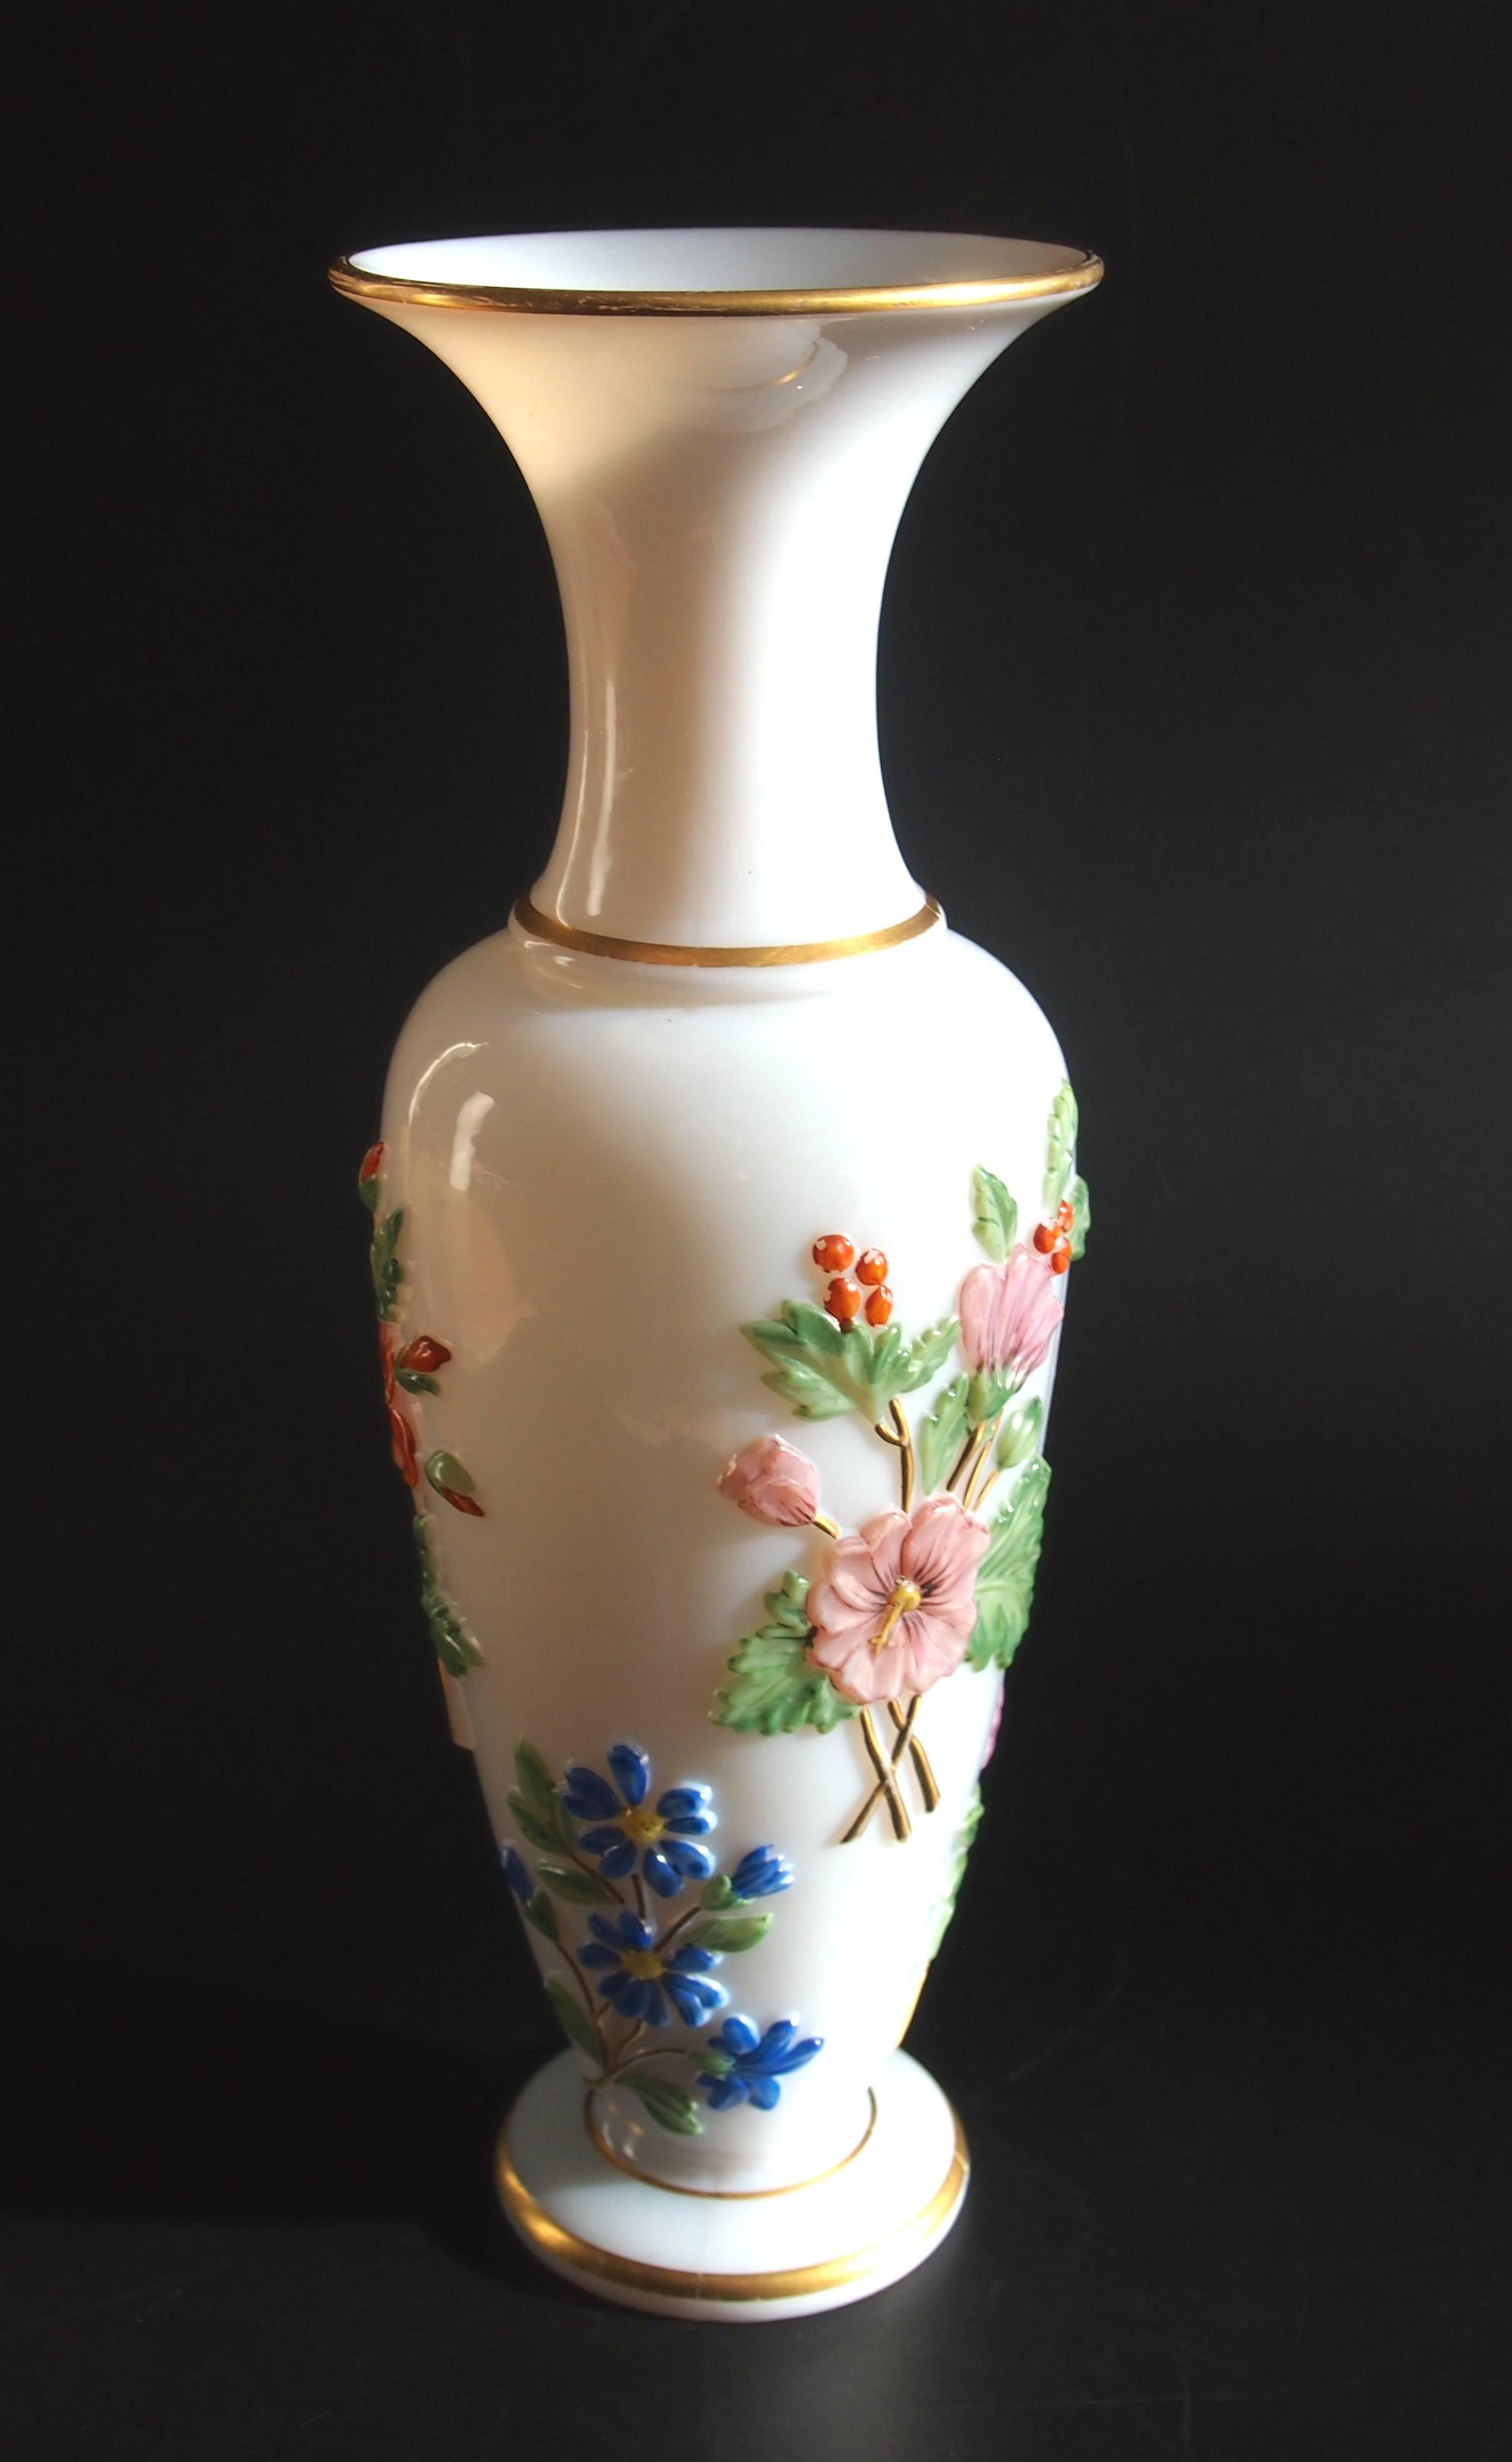 Amazing mid-19th century opaline enamelled and gilded Baccarat vase -polychrome enamelled over fine raised flowers. Vases like these were first displayed at the great Paris exhibition of 1855.


Baccarat is and has been the creator of finest